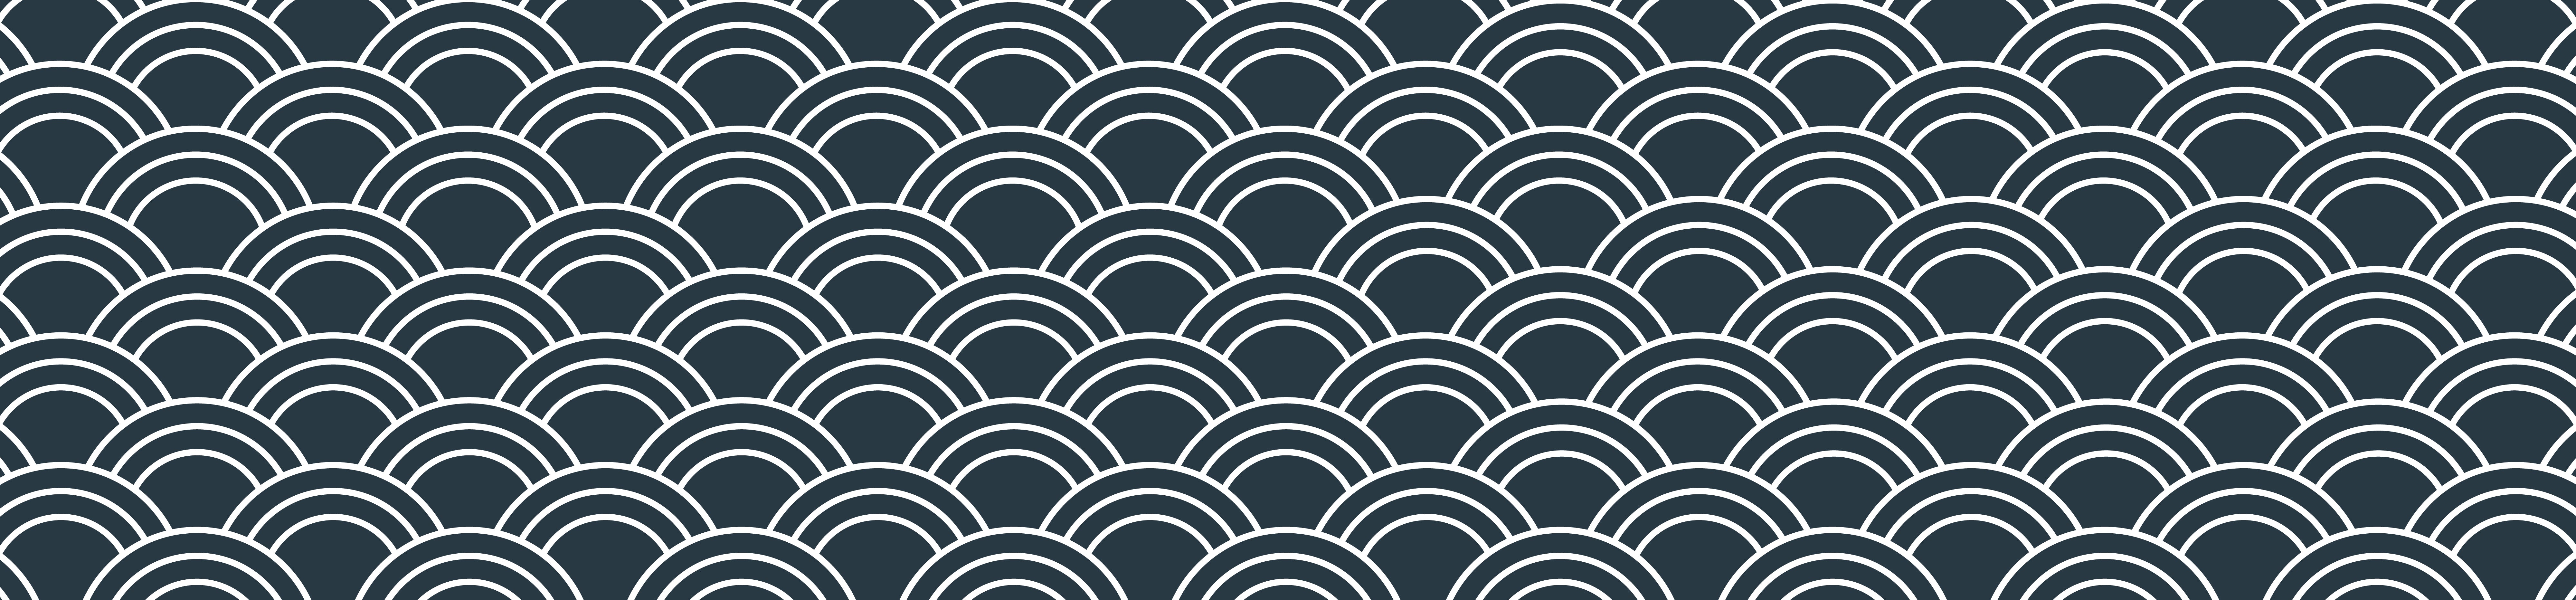 A seamless pattern of white and grey curved lines making continuous scalloped forms on a dark blue backdrop